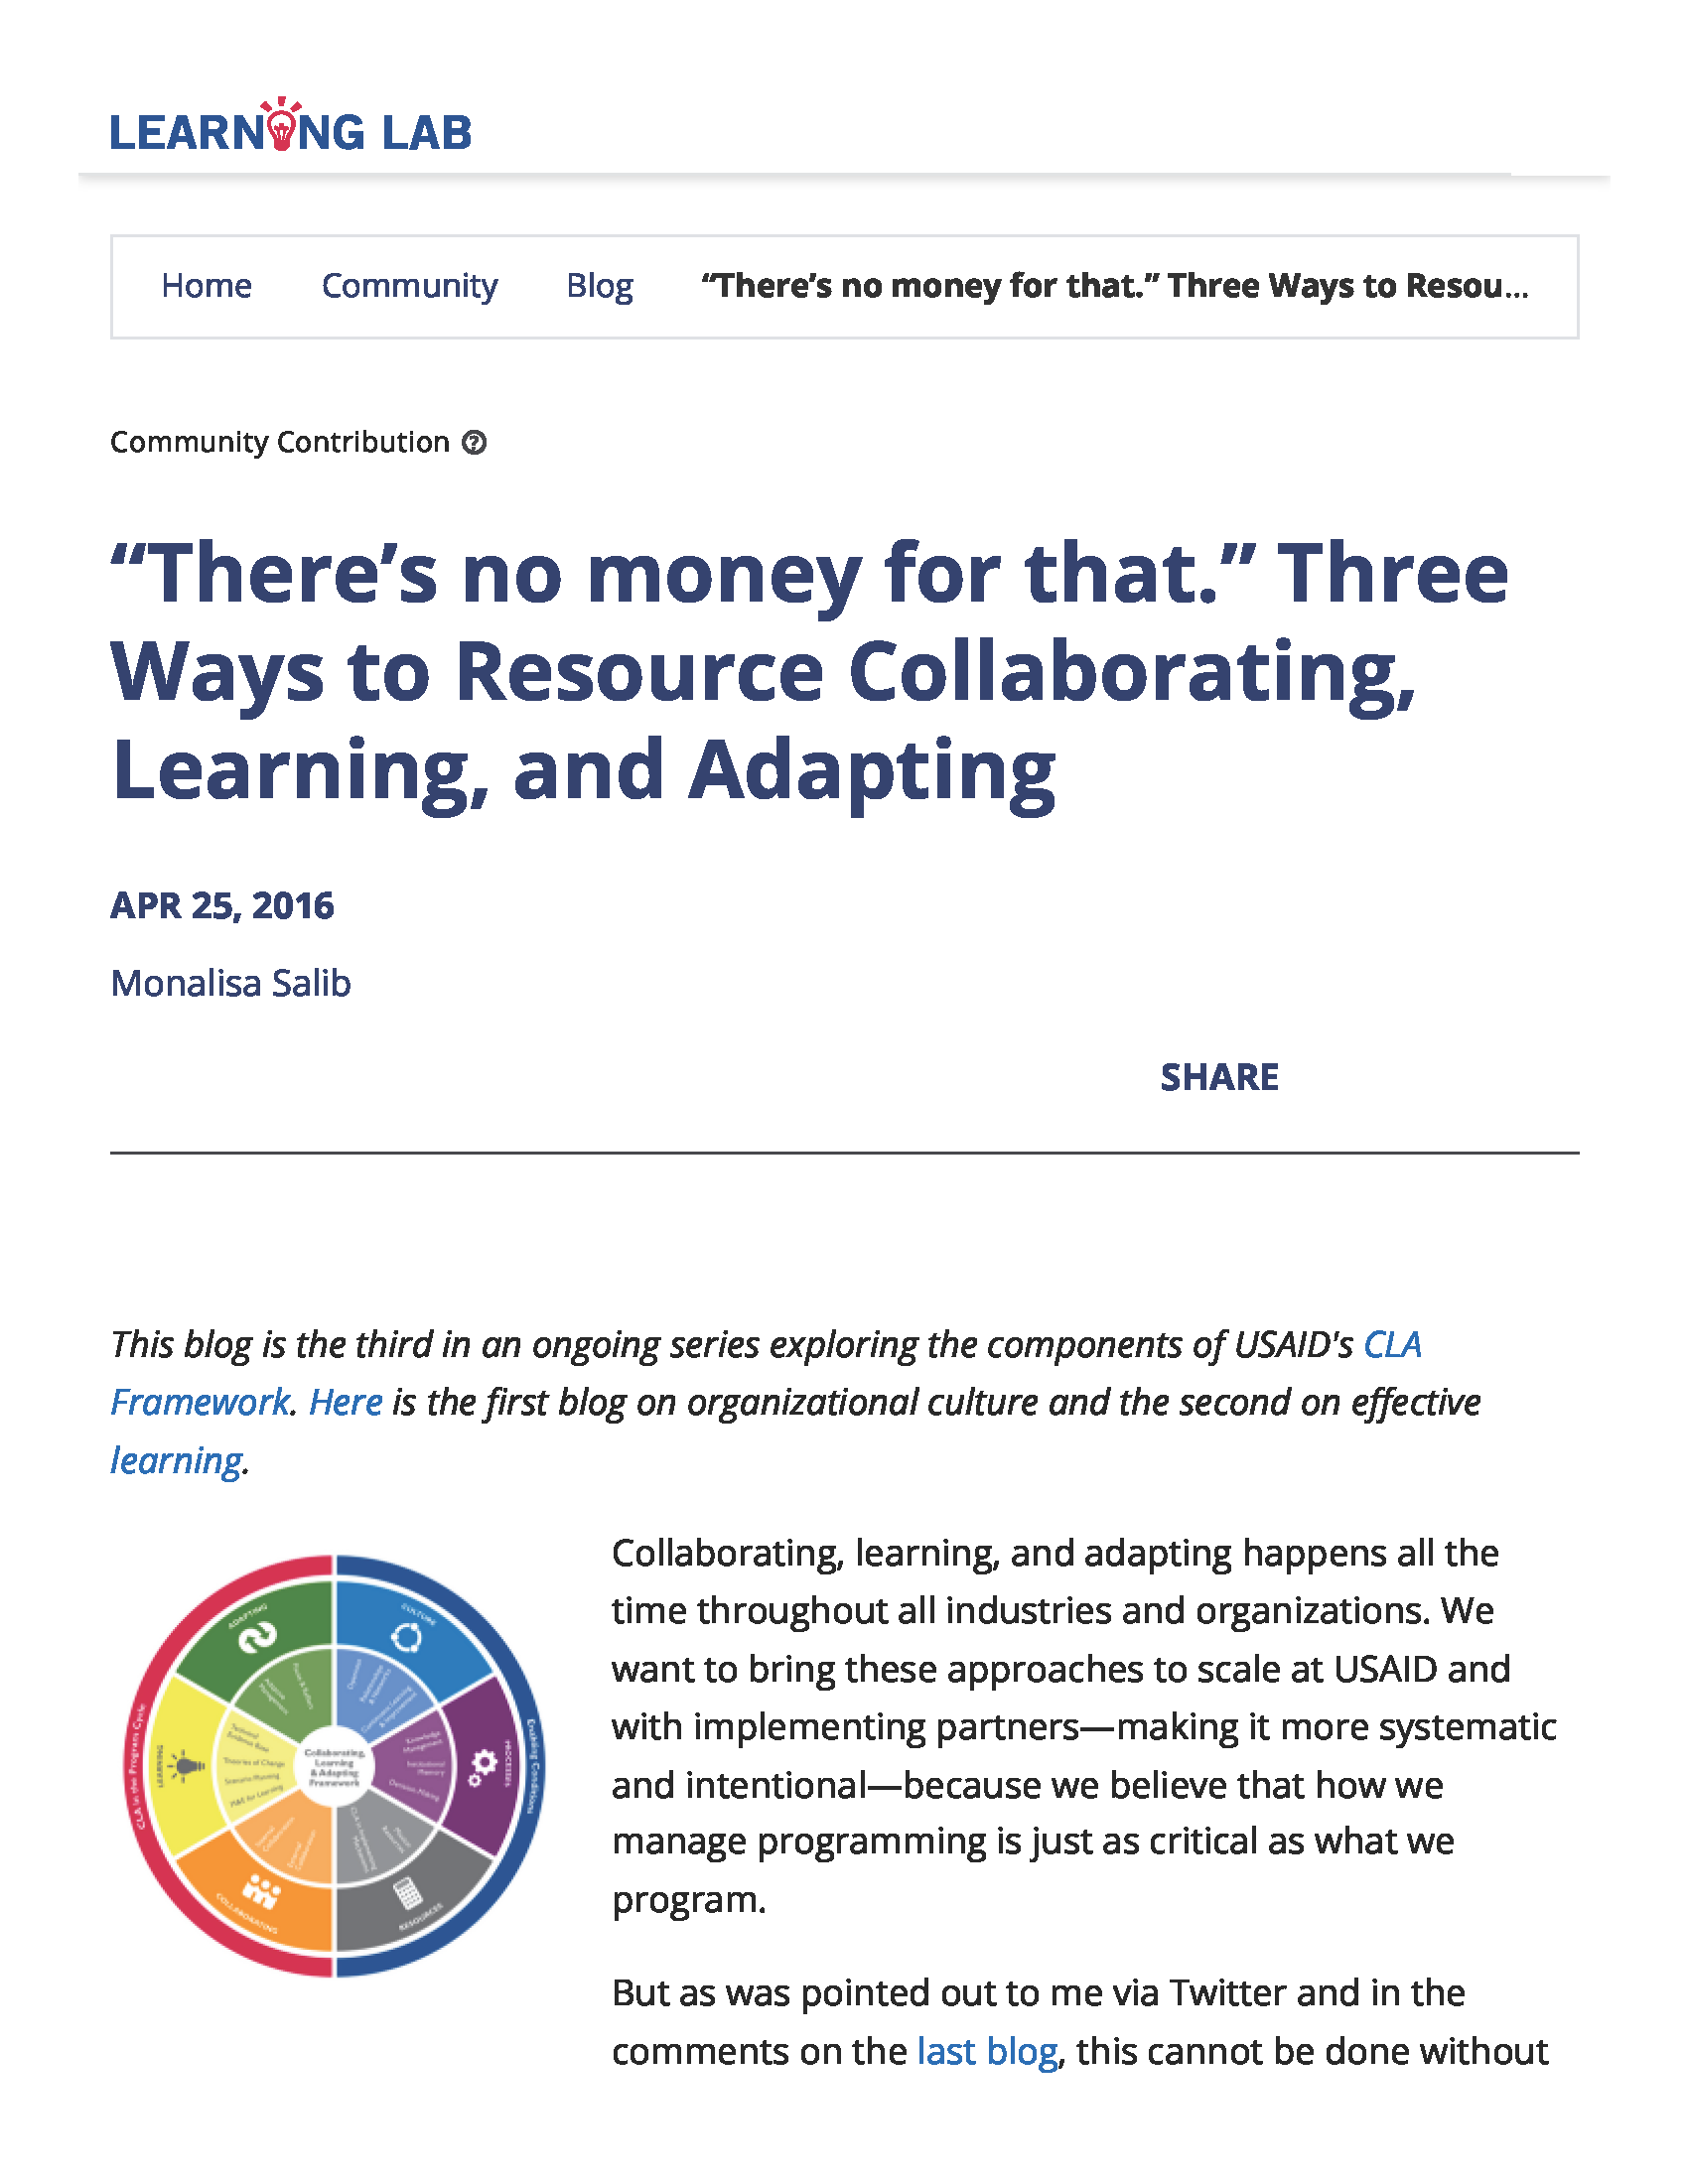 Cover page for “There’s no money for that.” Three Ways to Resource Collaborating, Learning, and Adapting